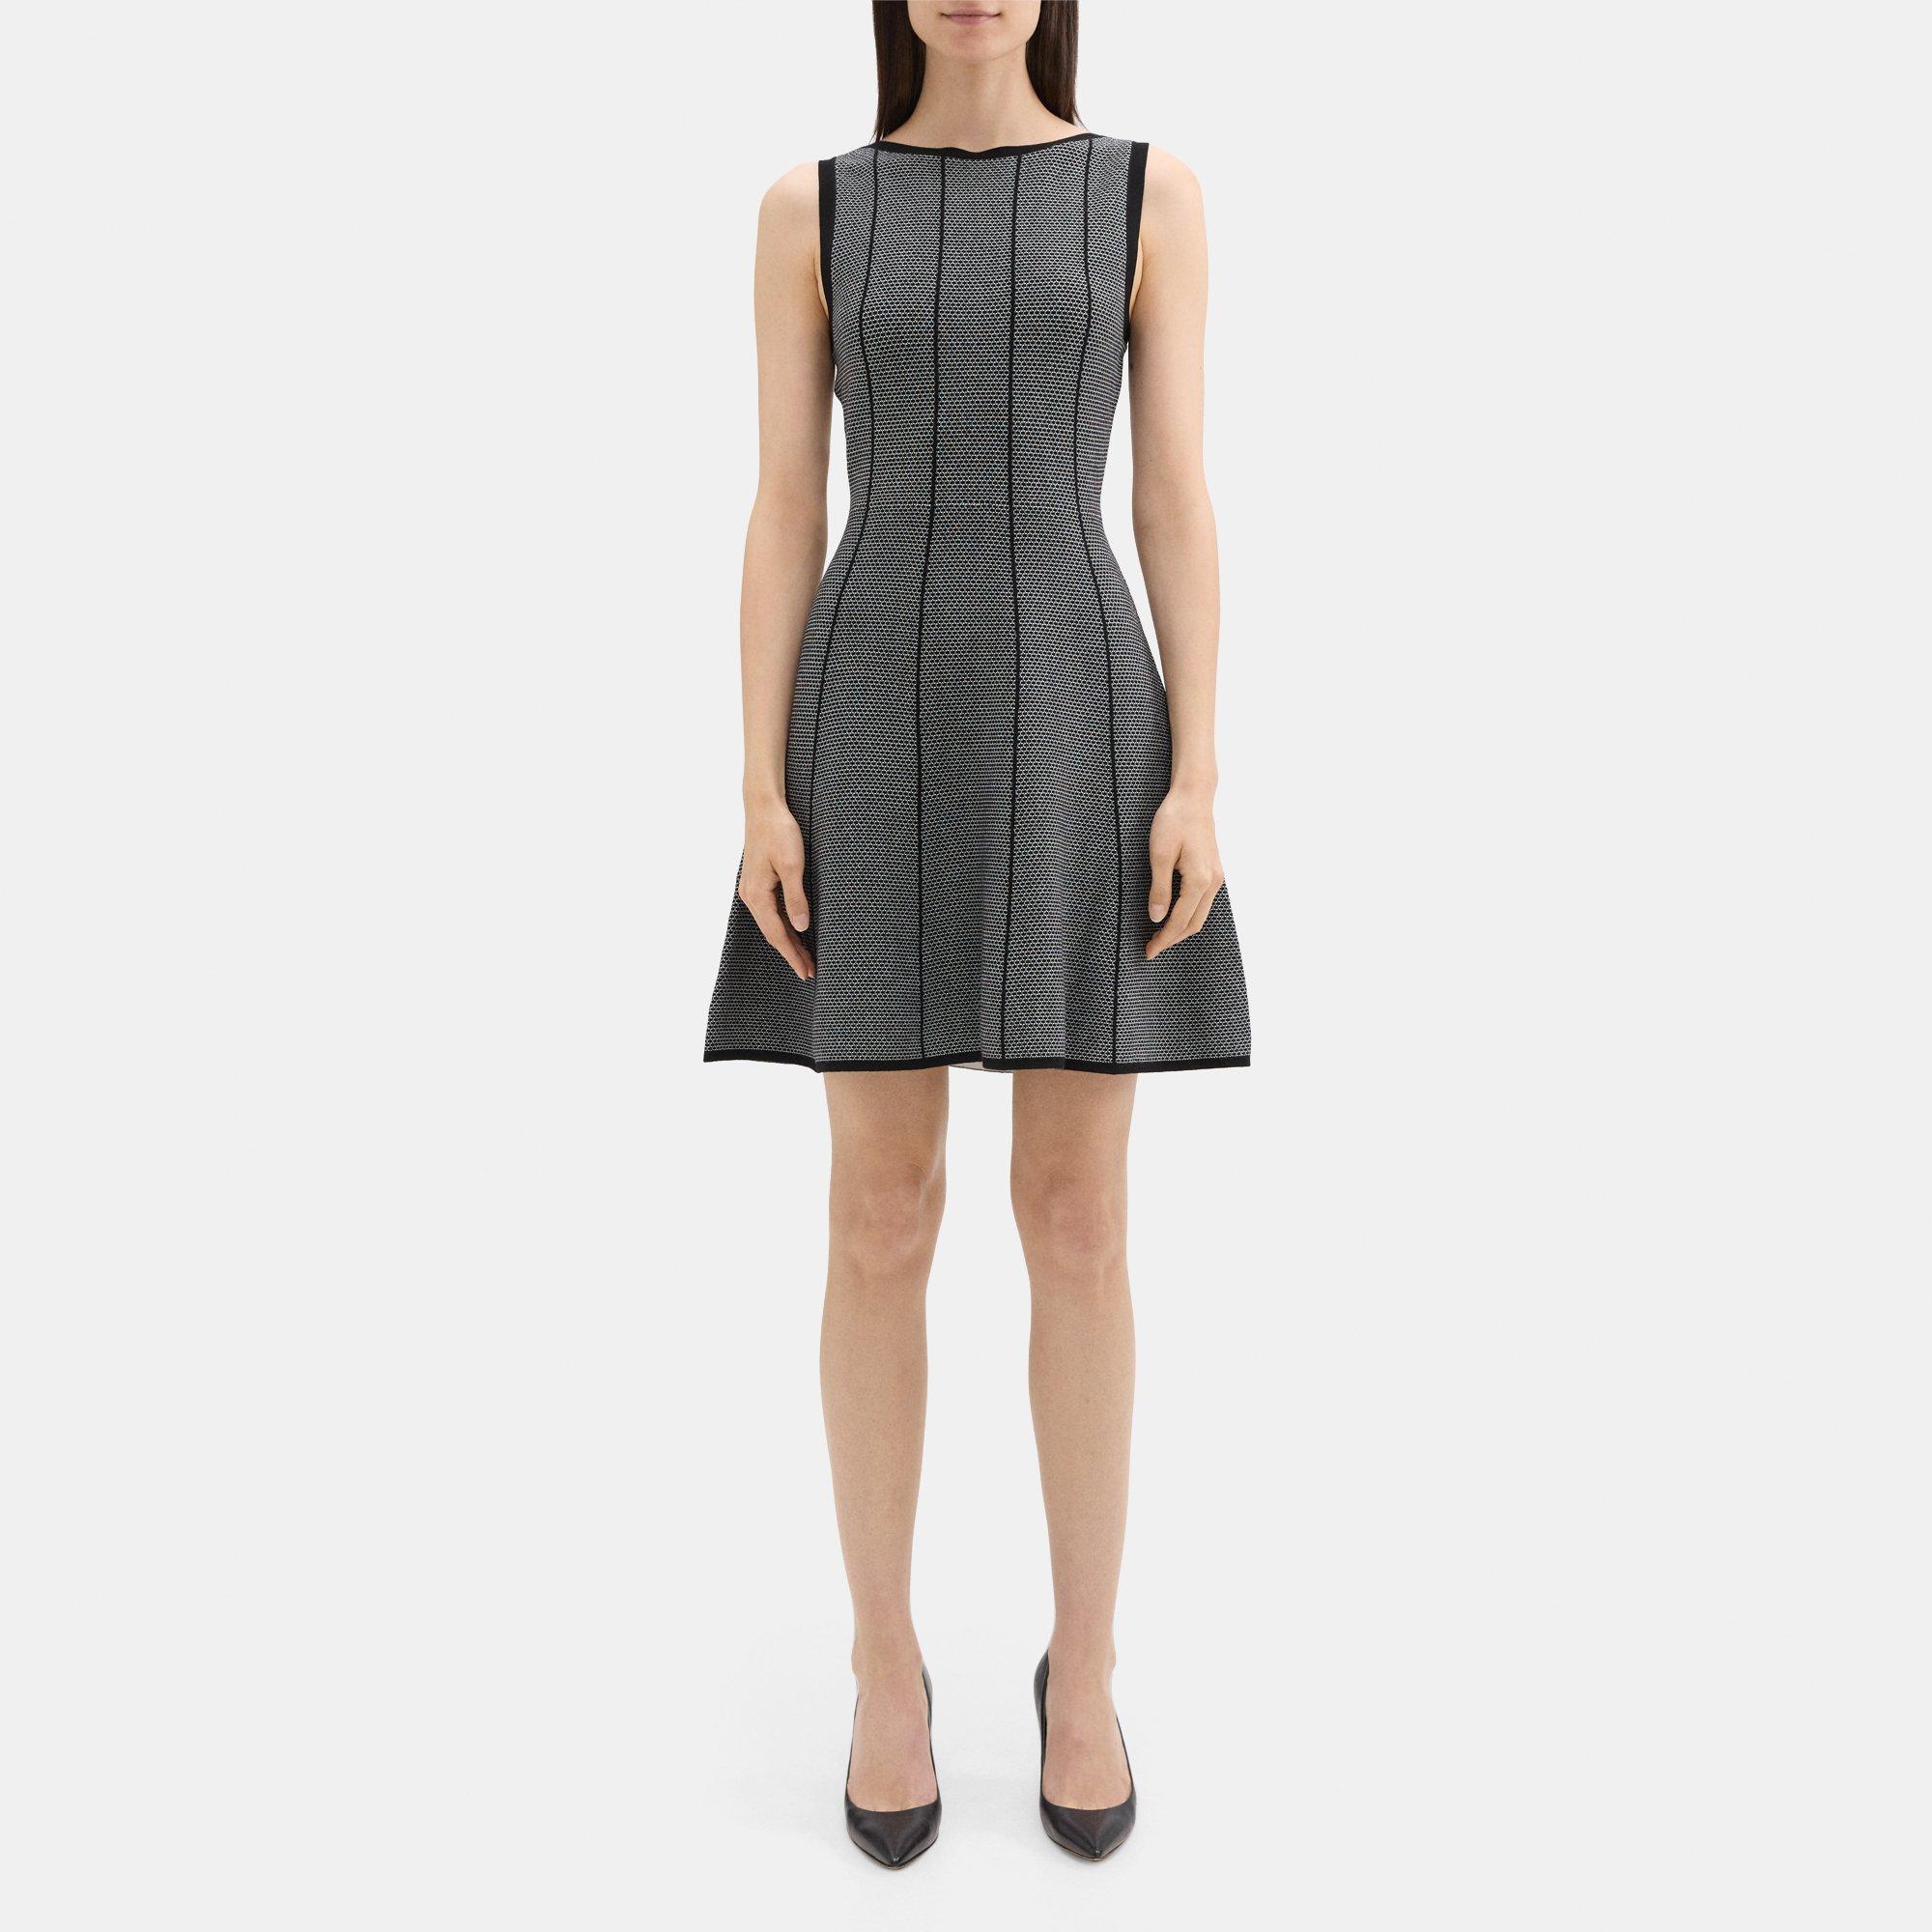 Theory Flared Dress in Stretch Viscose Knit